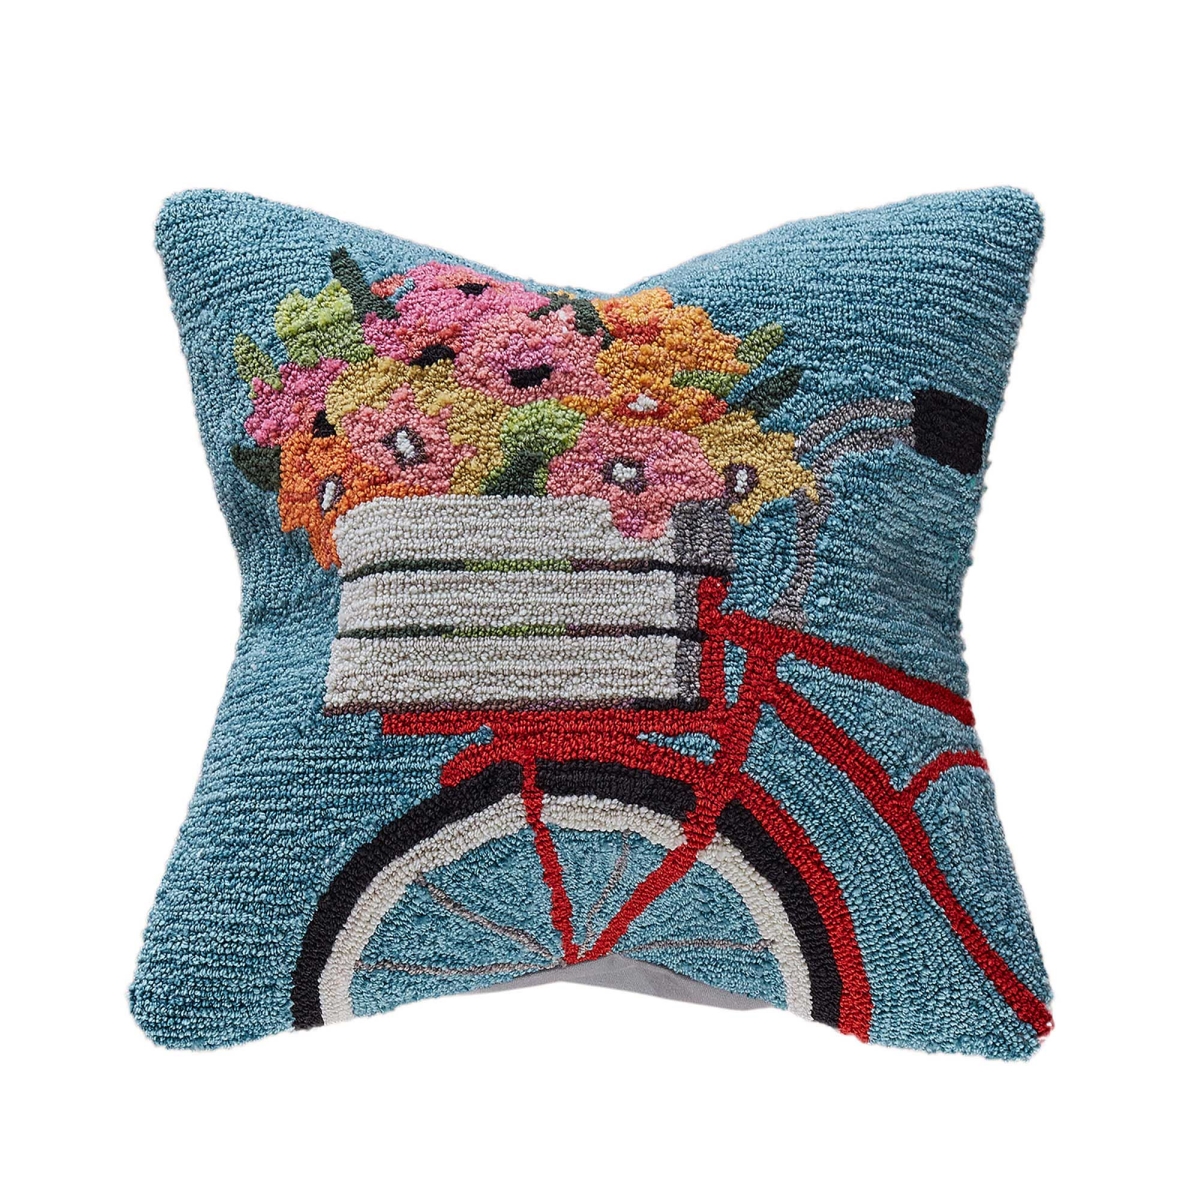 Trans-ocean Imports 7fp8s443403 18 In. Square Liora Manne Frontporch Bike Ride Indoor & Outdoor Hand Tufted Square Pillow - Blue